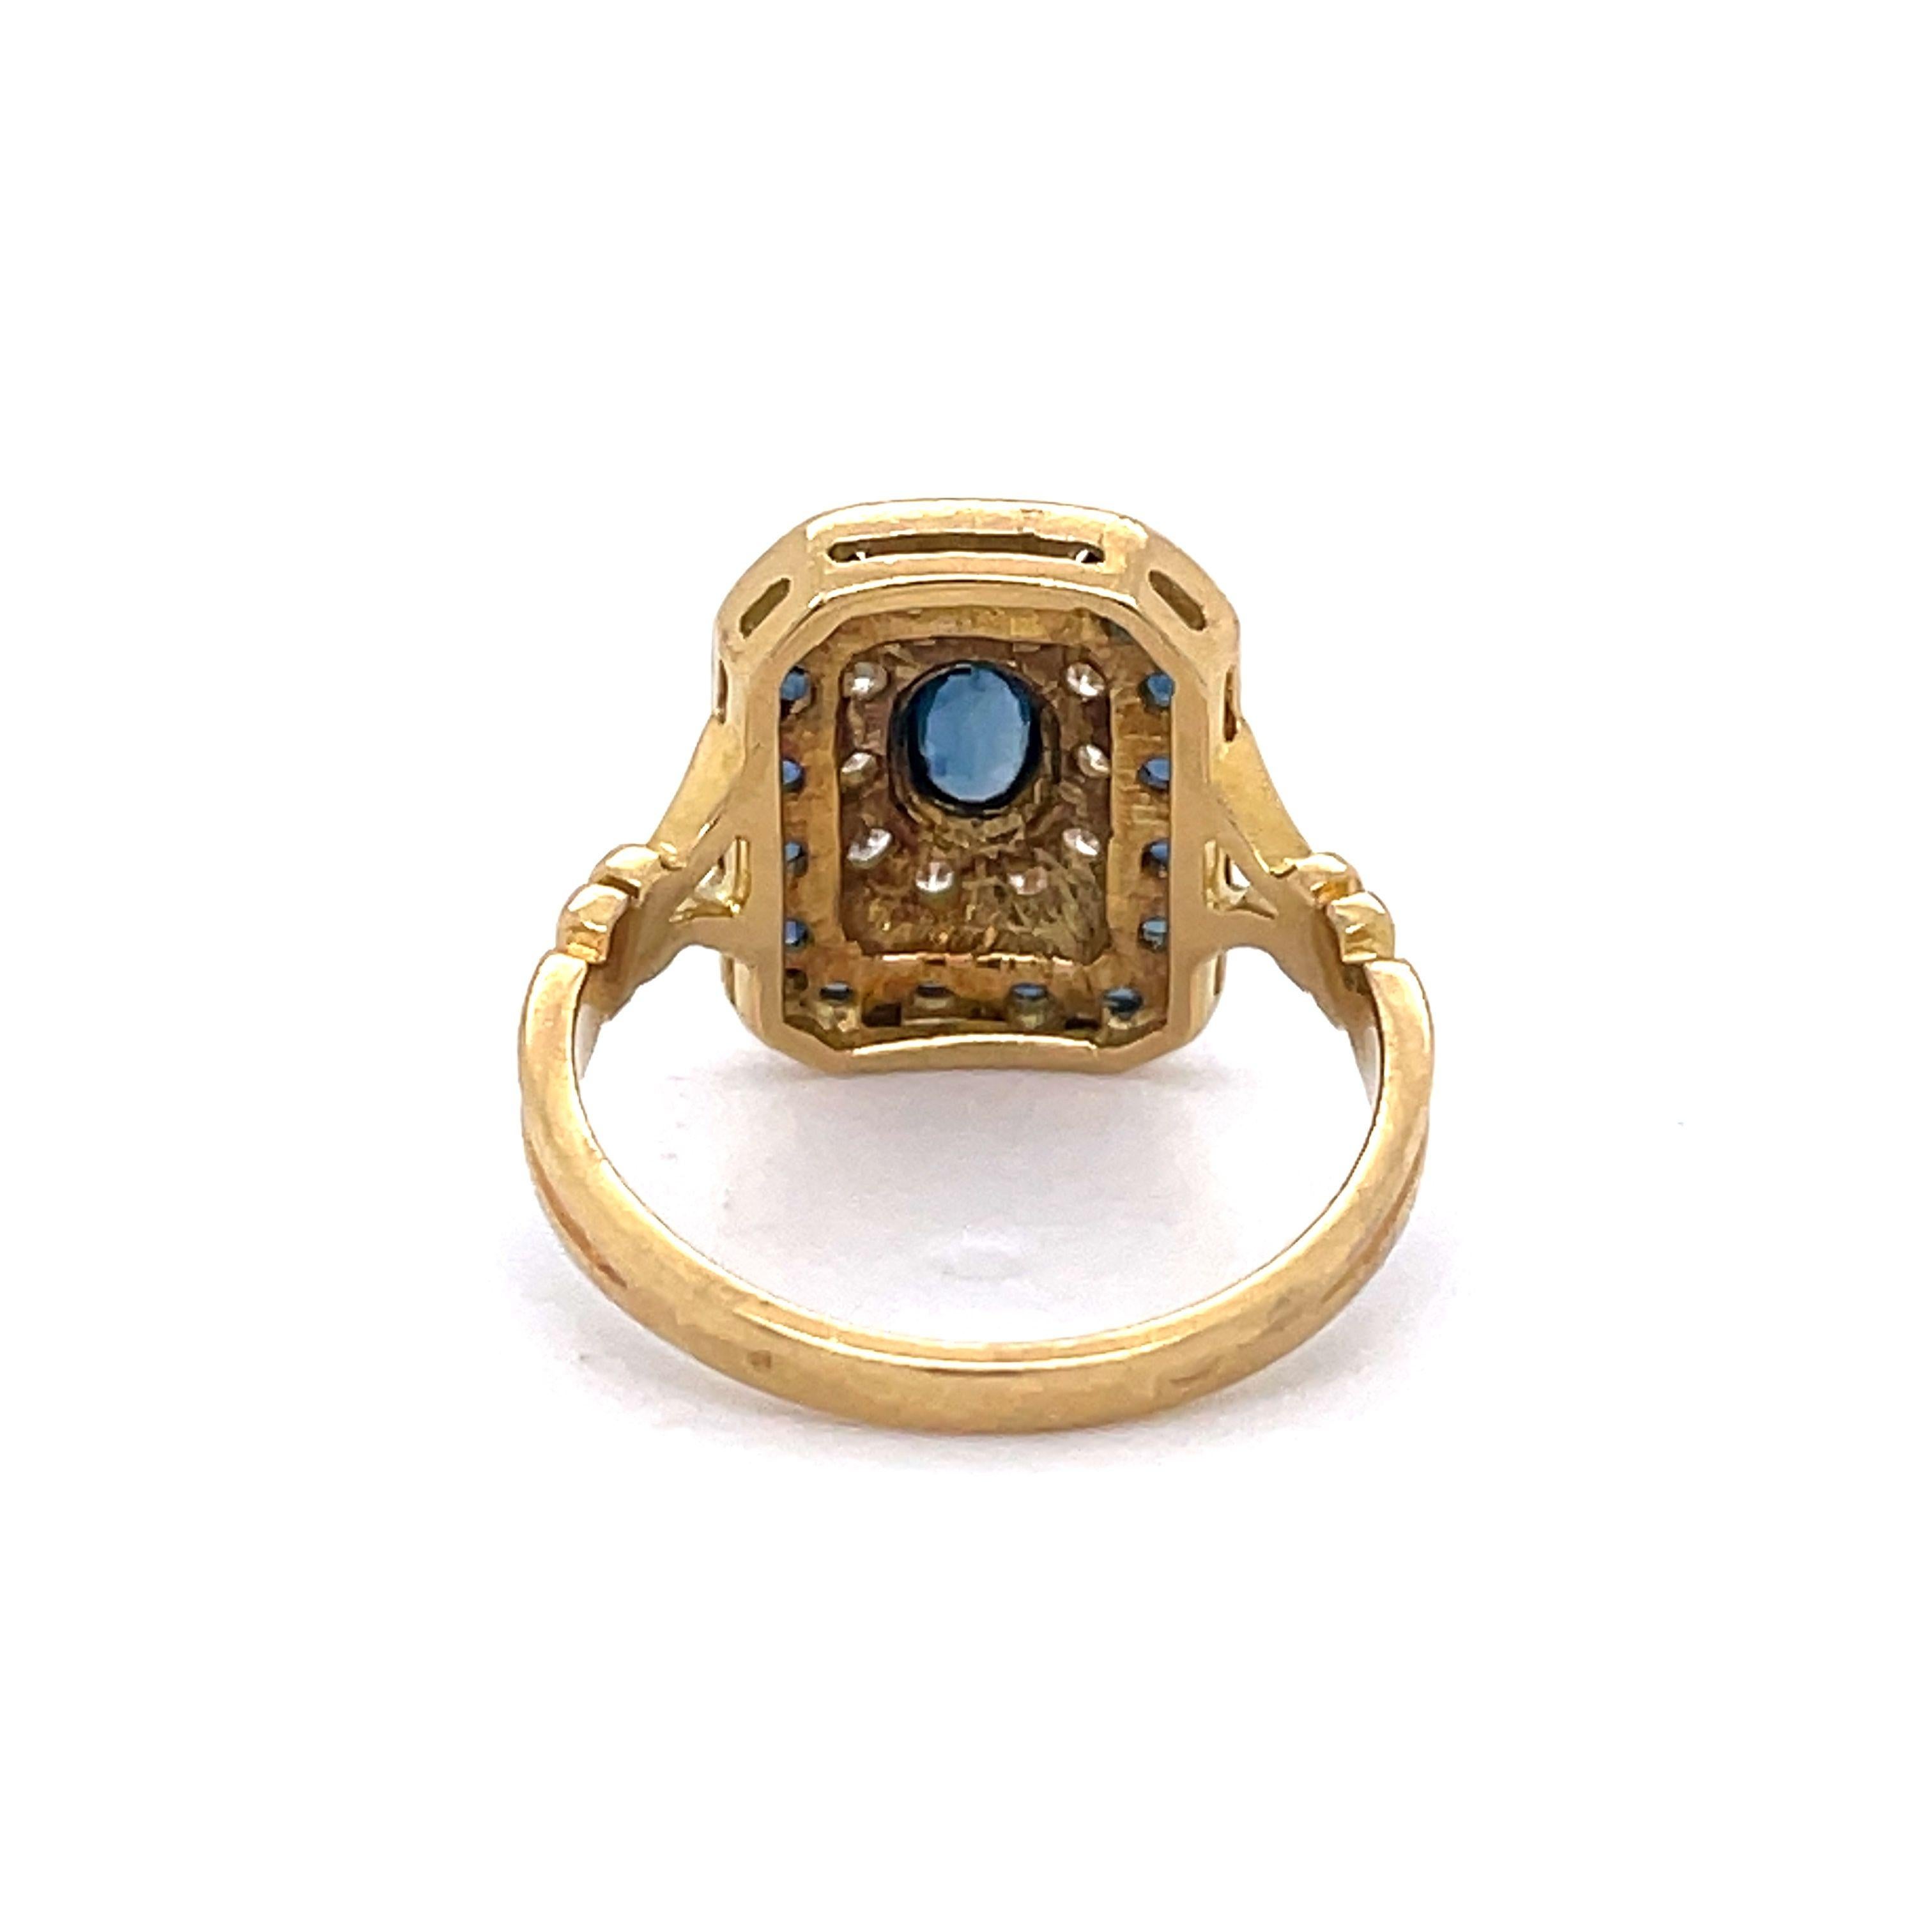 IGL Certified Art Deco Sapphire and Diamond Ring, 14k Yellow Gold, Vintage Ring In Excellent Condition For Sale In Ramat Gan, IL